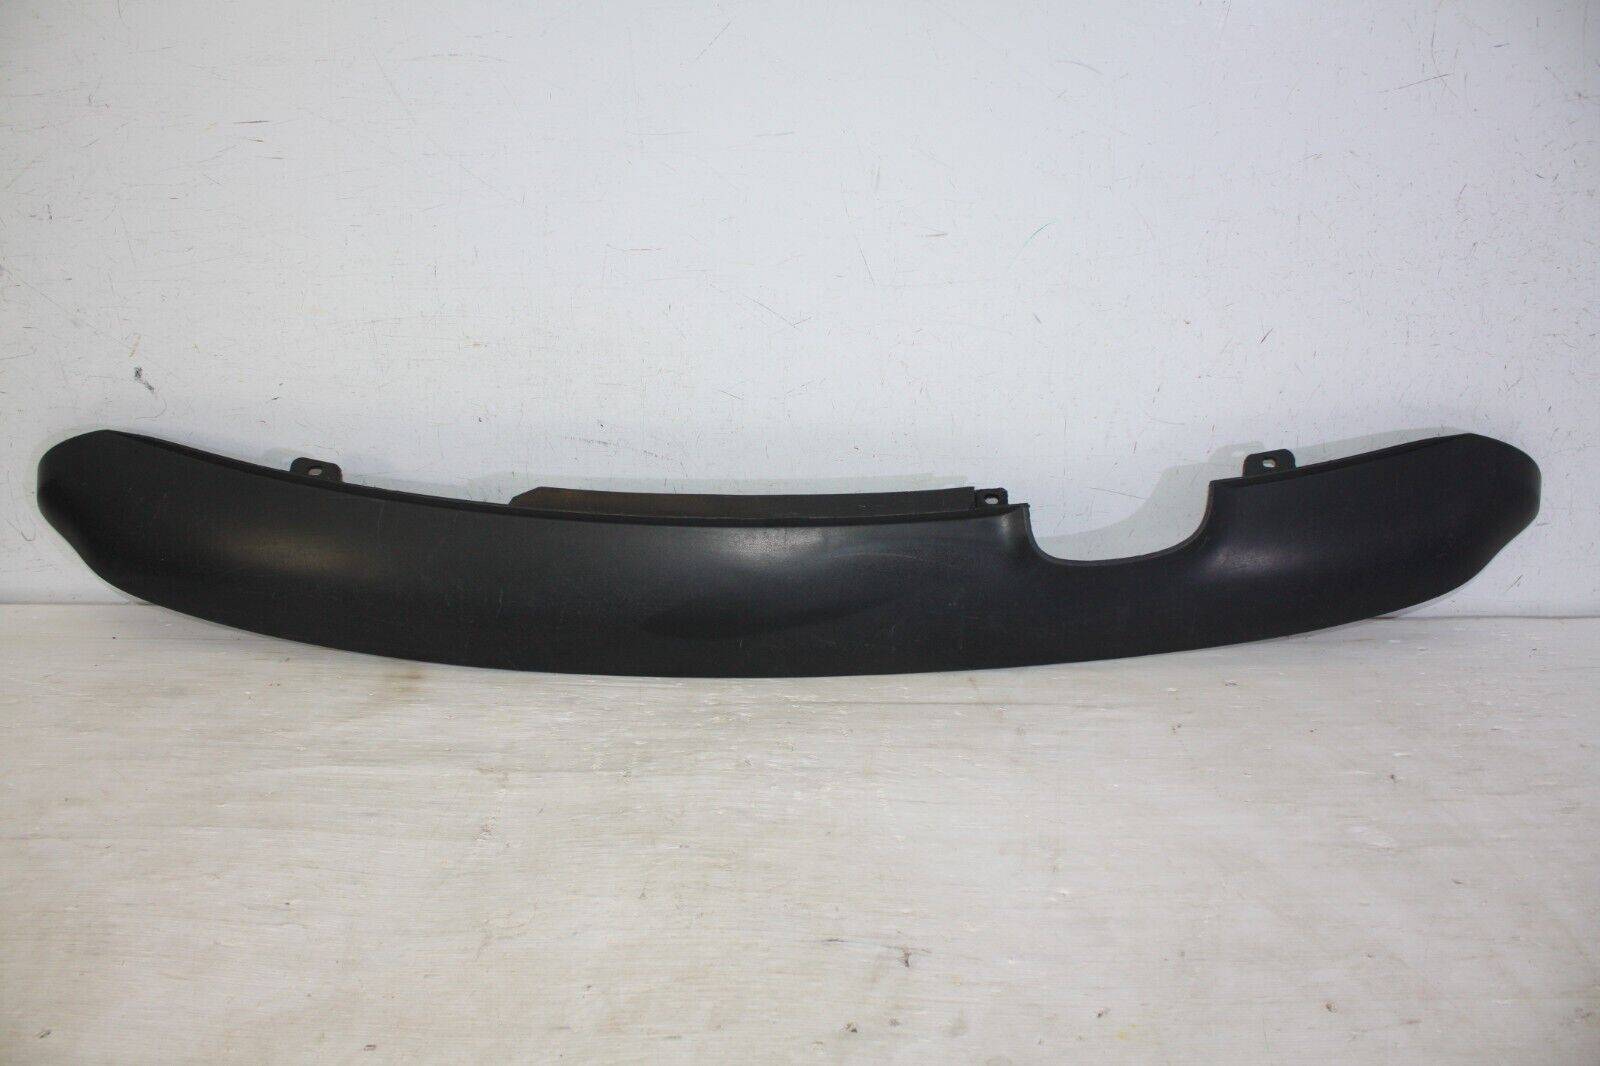 VW-Polo-Rear-Bumper-Lower-Section-2002-To-2005-6Q6807521-Genuine-176093468813